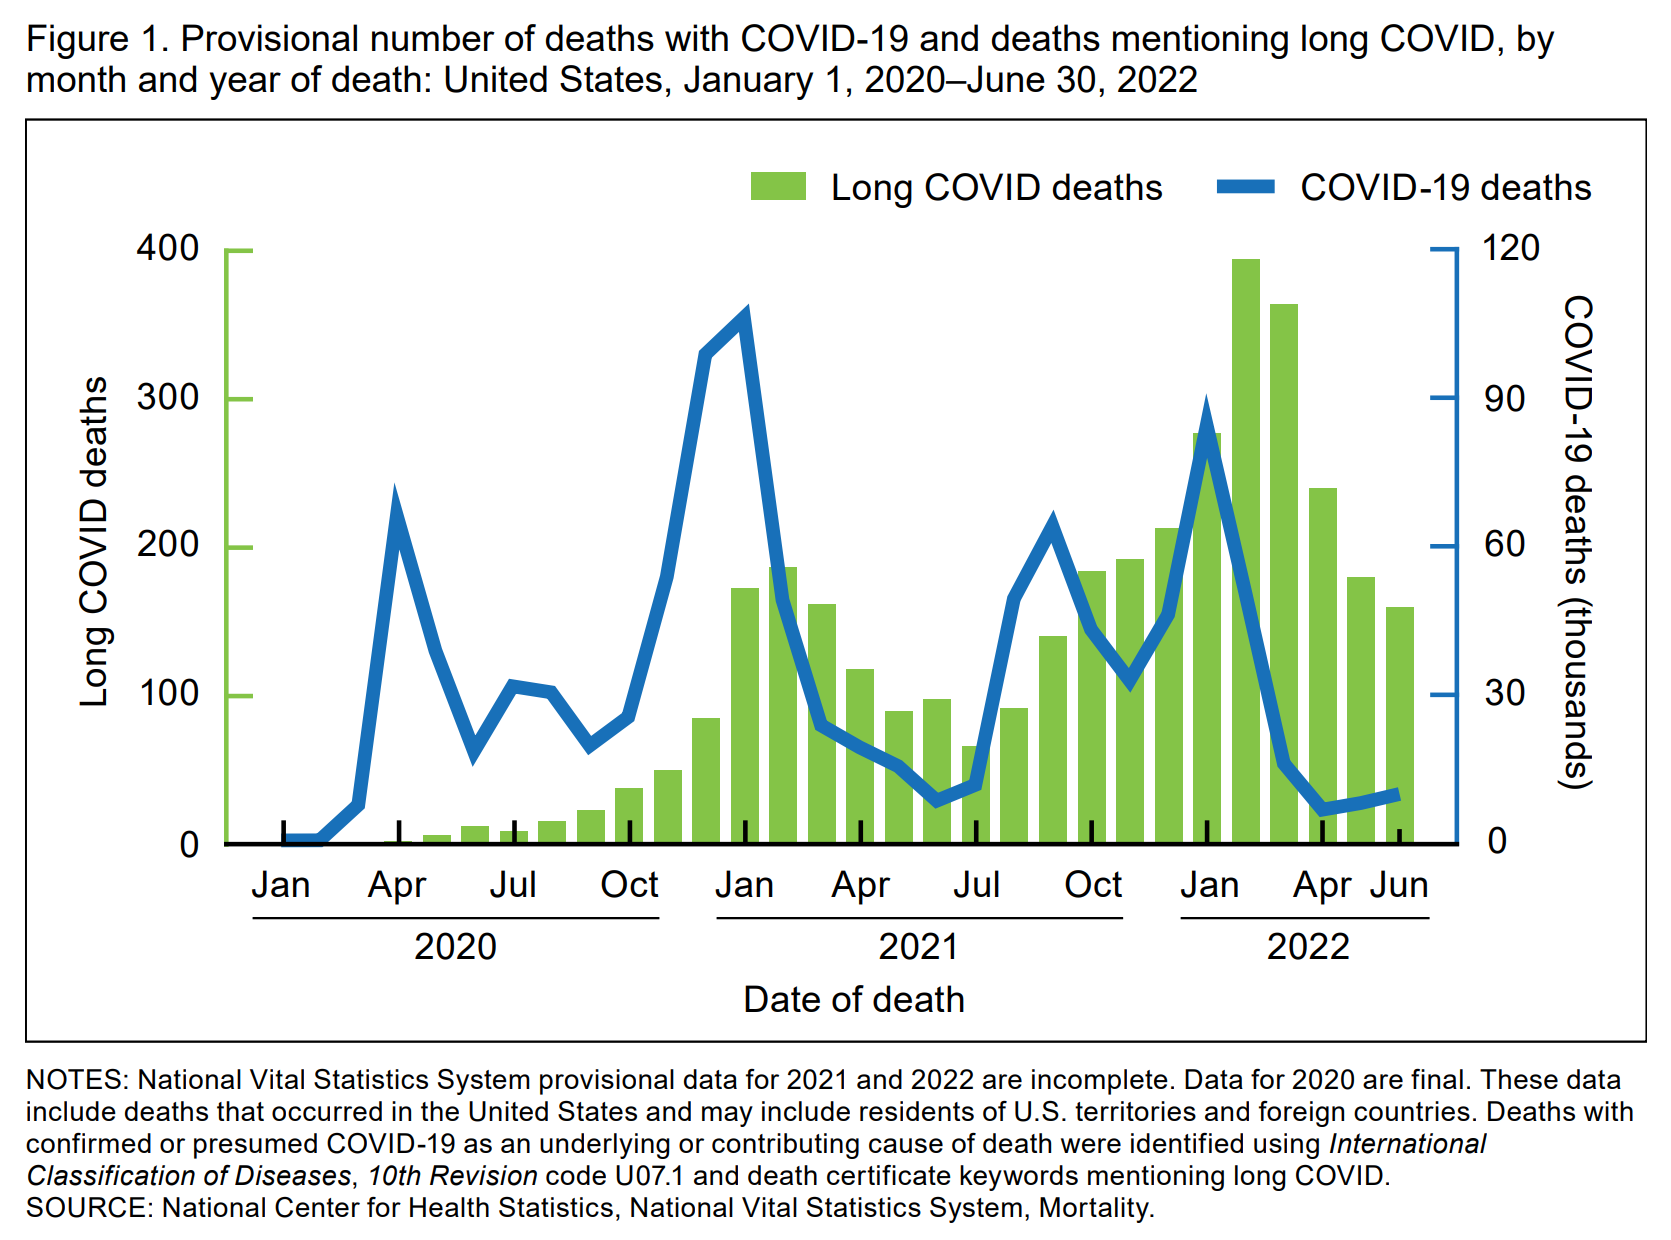 Provisional number of deaths with COVID-19 and deaths mentioning long COVID in the United States, by month and year of death, 1 January 2022-30-June 2022. Graphic: Ahmad, et al., 2022 / NVSS / CDC